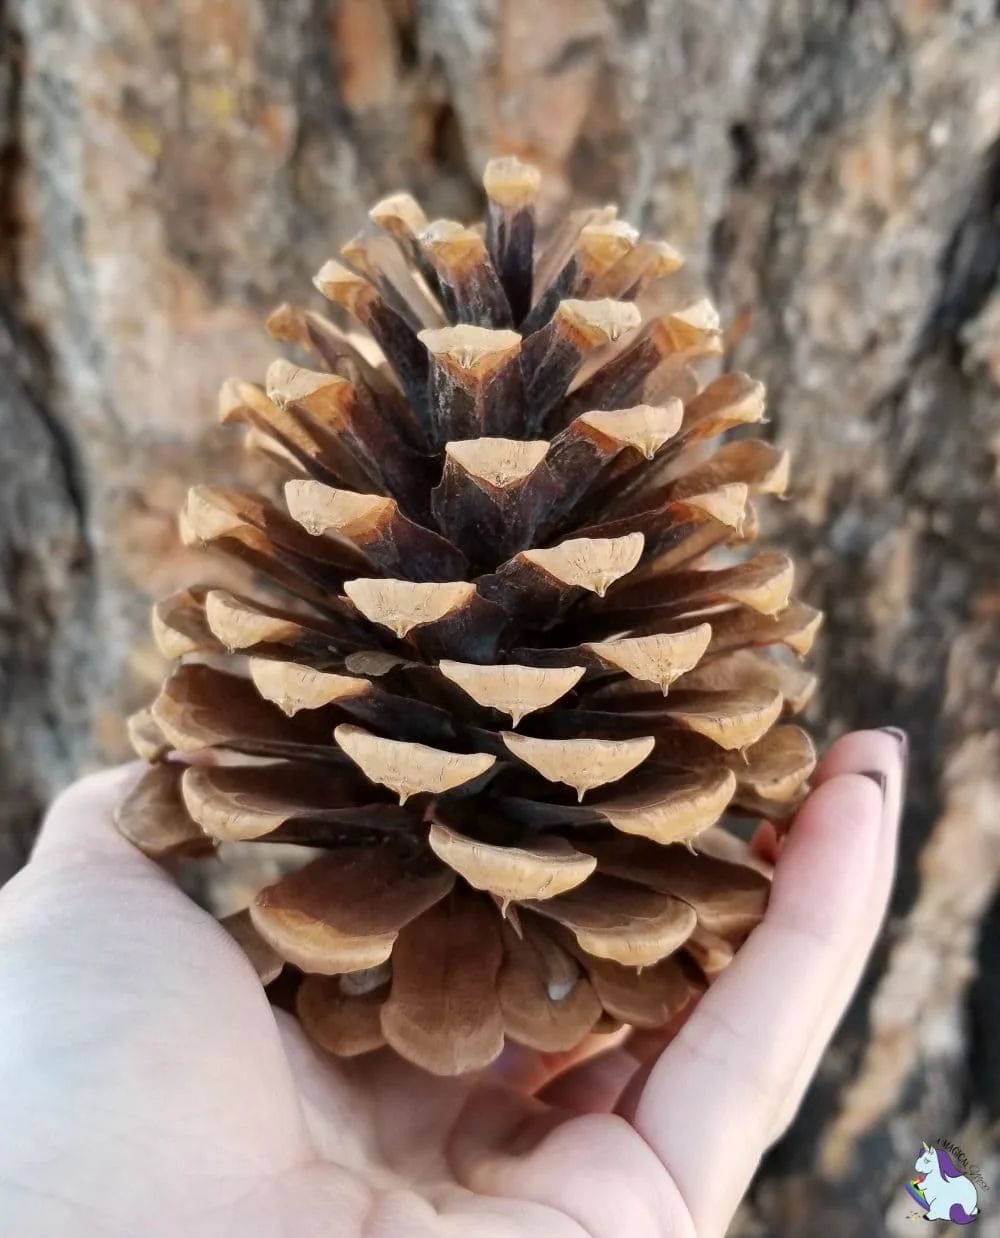 Ponderosa pine cones are fascinating! This was found near the South Rim of the Grand Canyon